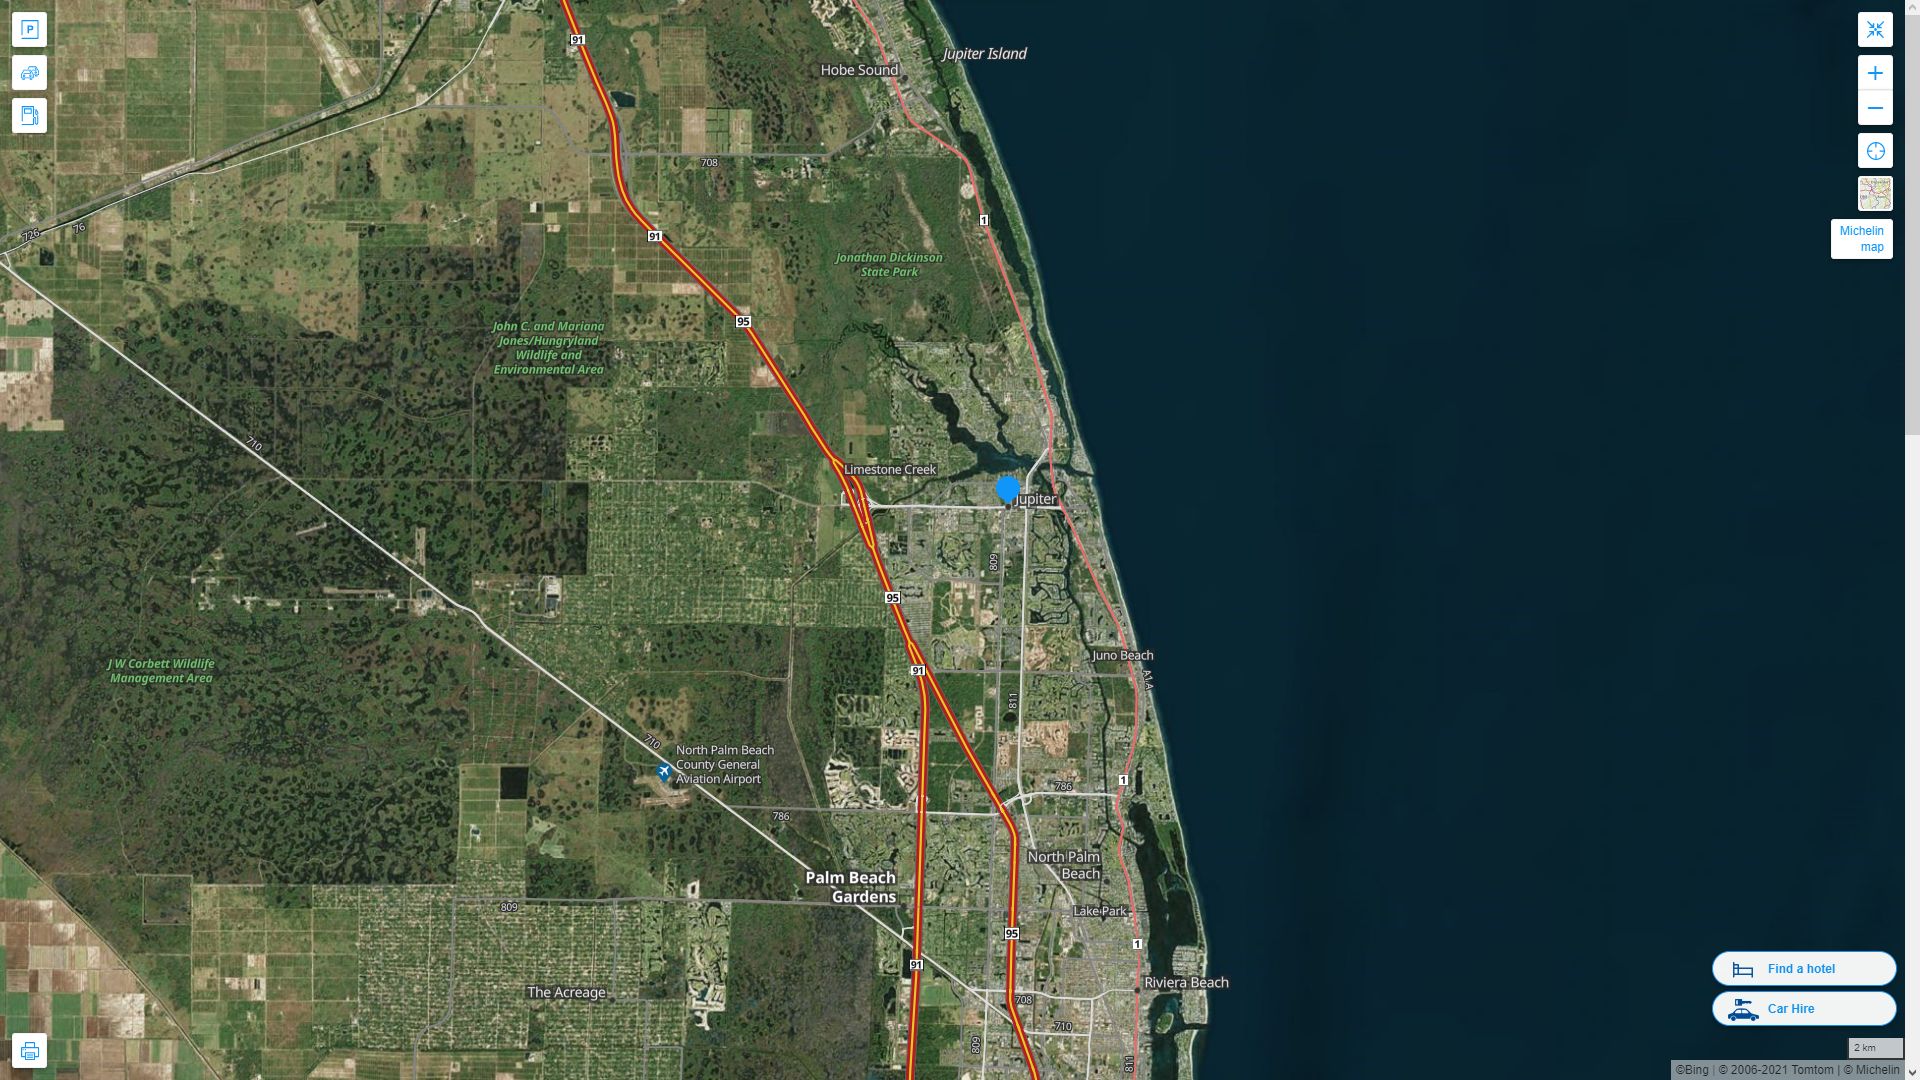 Jupiter Florida Highway and Road Map with Satellite View